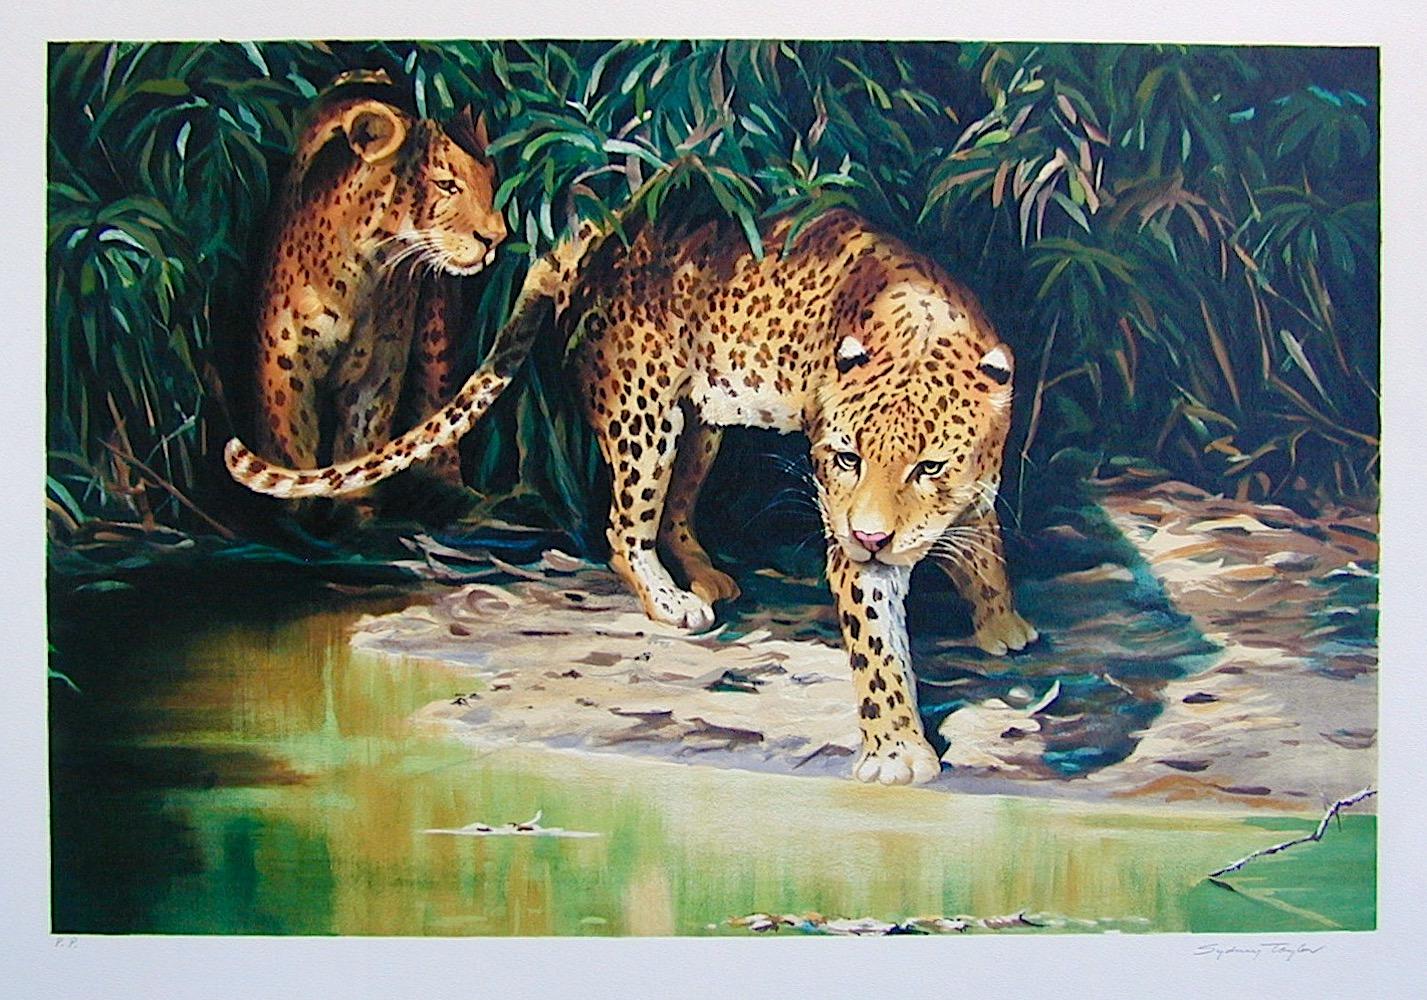 Sydney Taylor Animal Print - OUT OF THE SHADOWS Signed Lithograph, Leopard Portrait, Jungle Animals, Wildlife